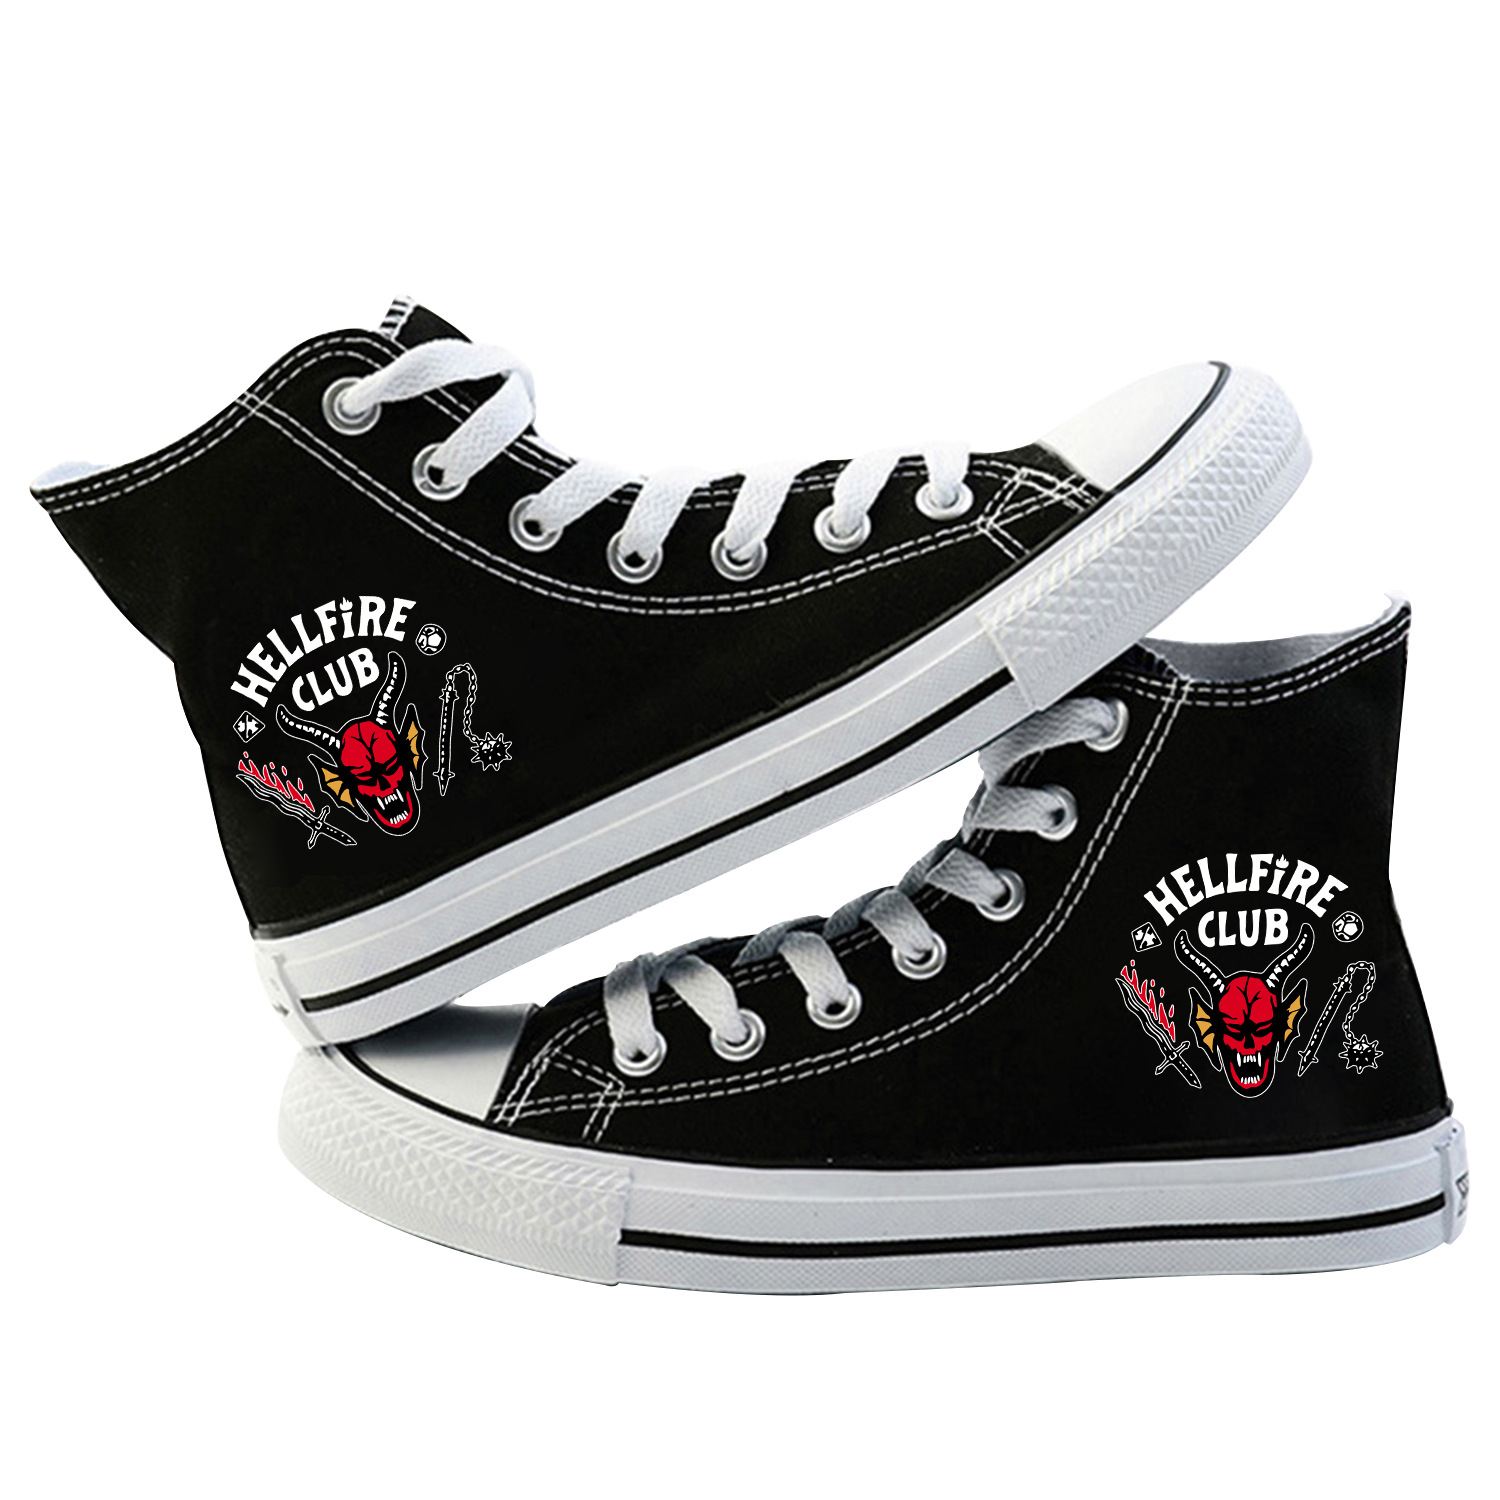 Hellfire Club High Top Sneakers Canvas Shoes Stranger Things